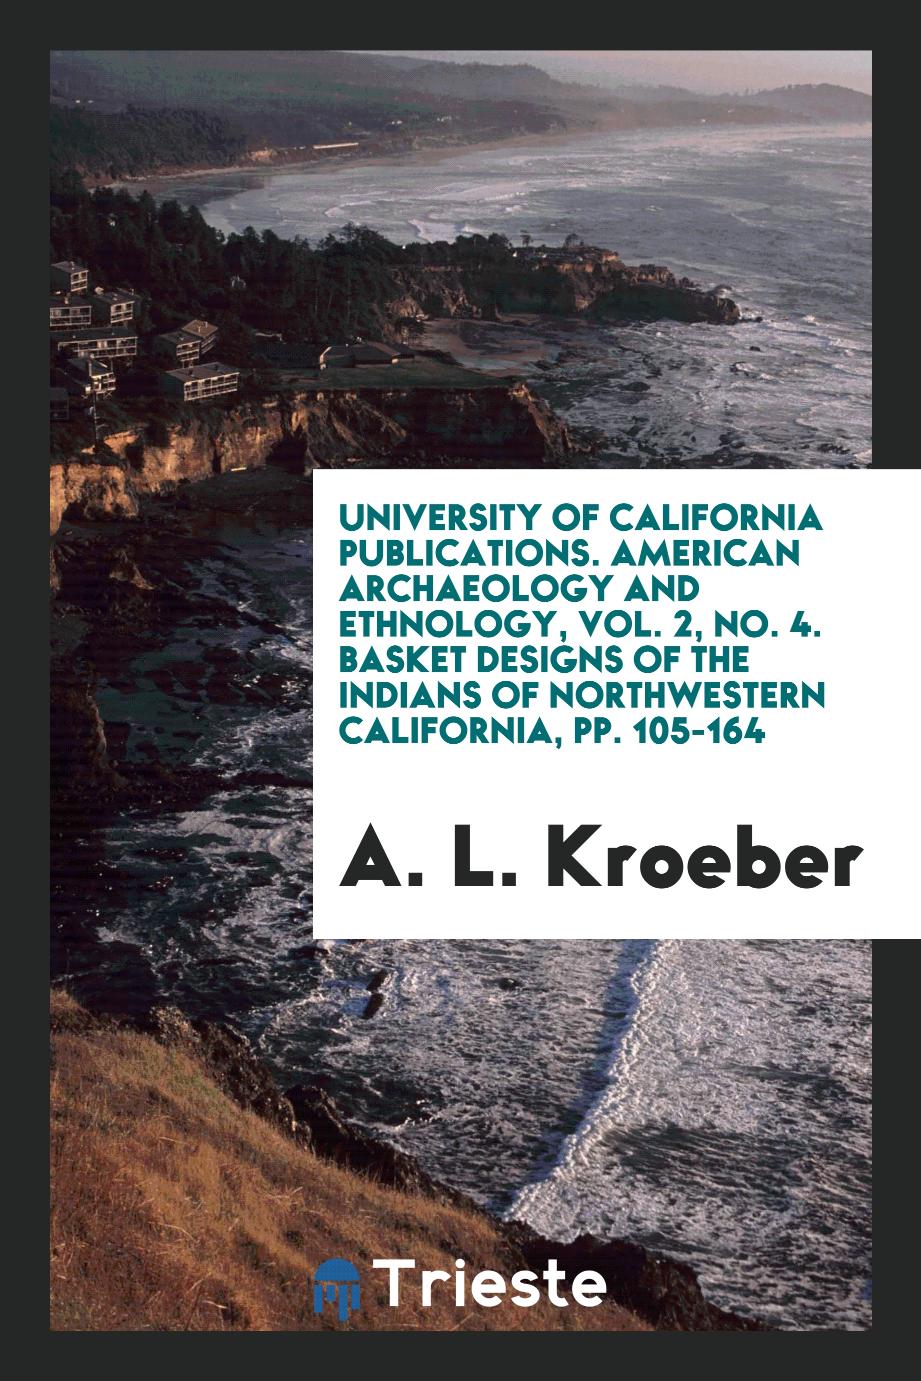 University of California Publications. American Archaeology and Ethnology, Vol. 2, No. 4. Basket Designs of the Indians of Northwestern California, pp. 105-164